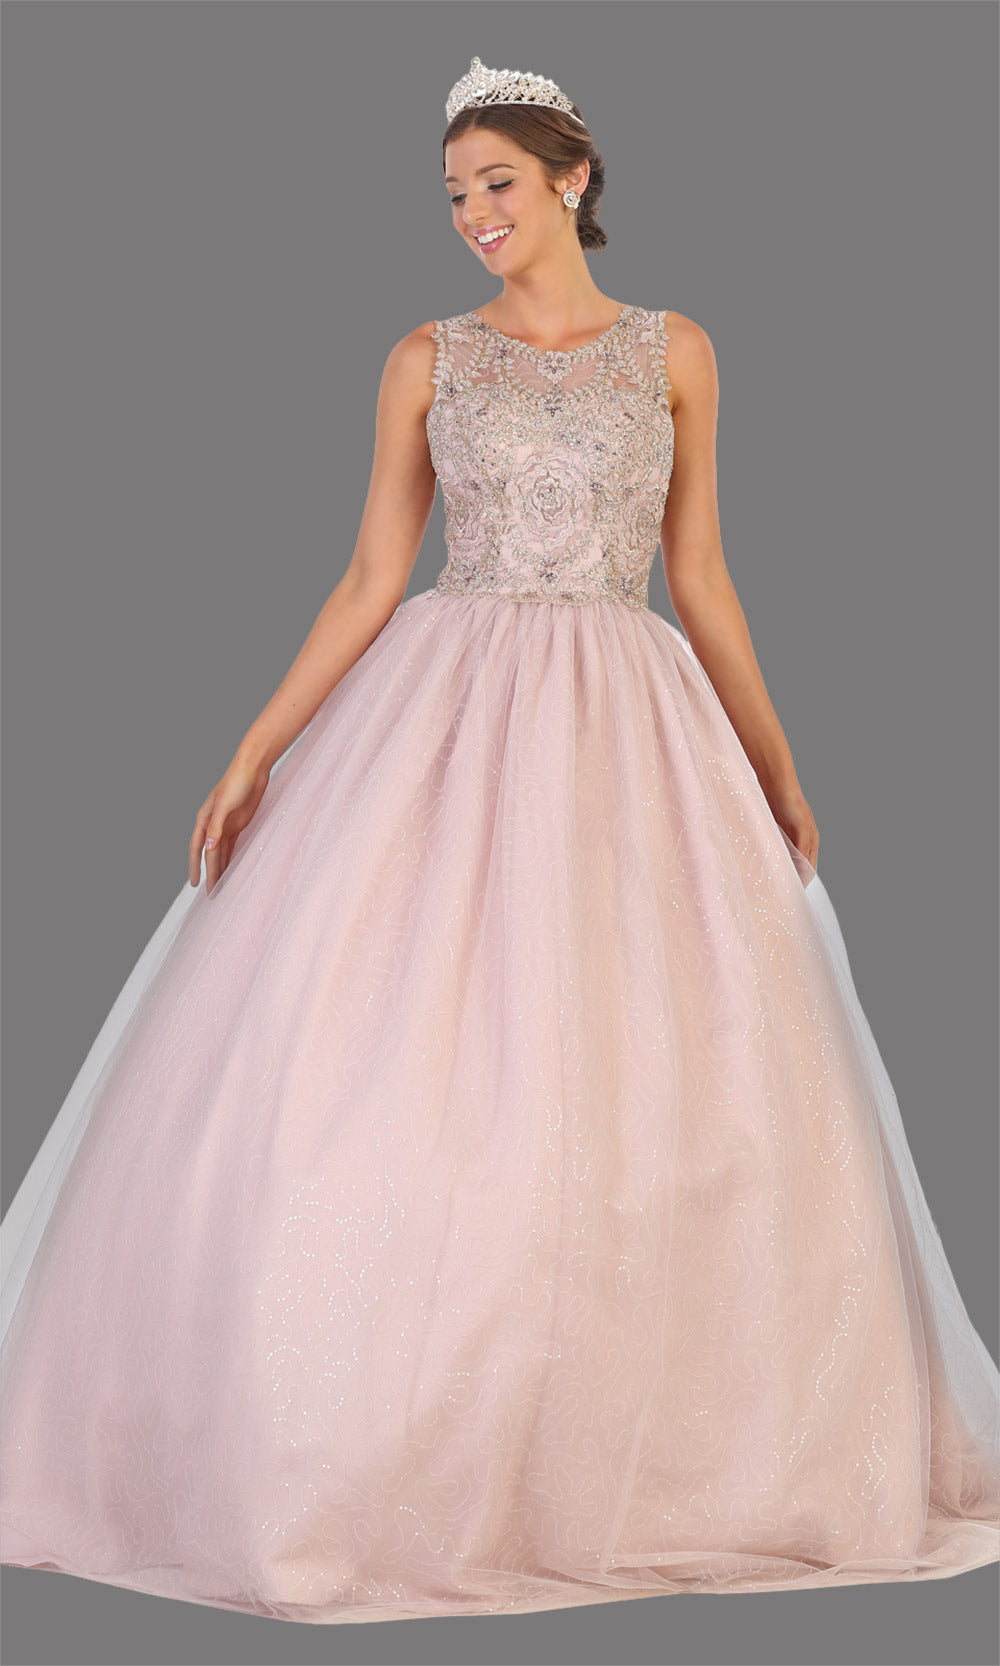 Mayqueen LK137 mauve quinceanera high neck w/gold lace ball gown. Dusty rose sequin ball gown is perfect for engagement dress, wedding reception, indowestern party gown, sweet 16, debut, sweet 15, sweet 18. Plus sizes available for ballgowns.jpg